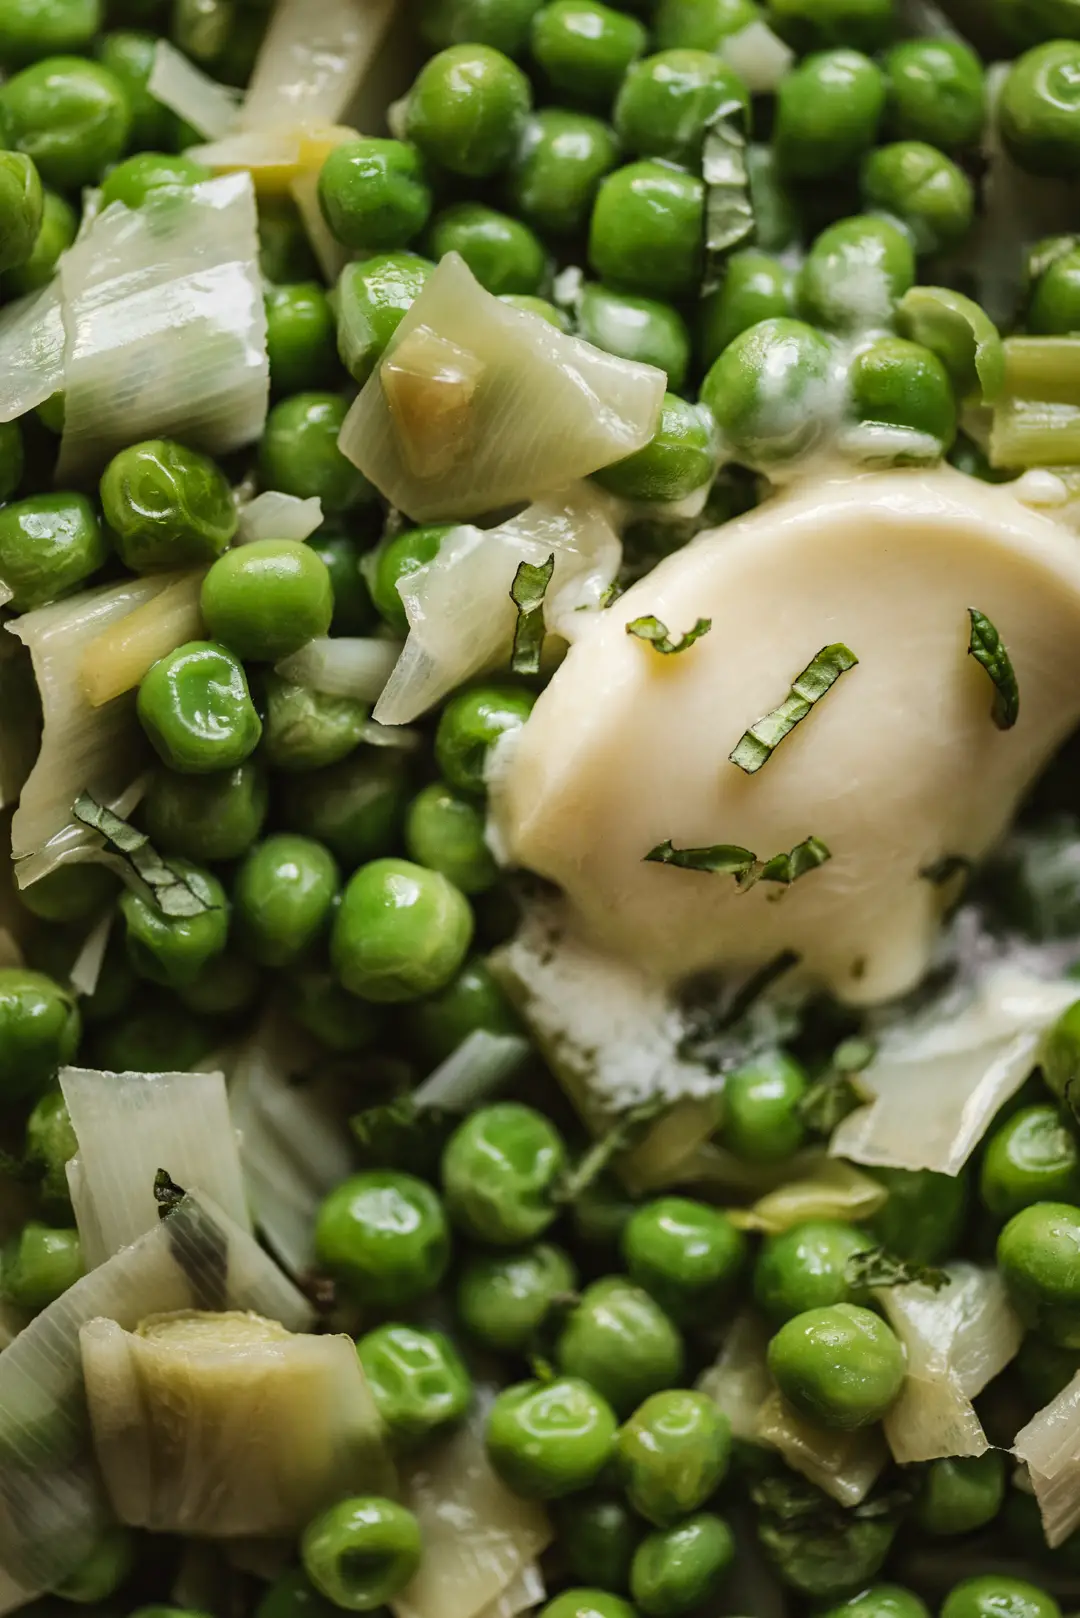 While this recipe for buttered peas with leeks and mint may be simple, it truly is the perfect way to eat peas.